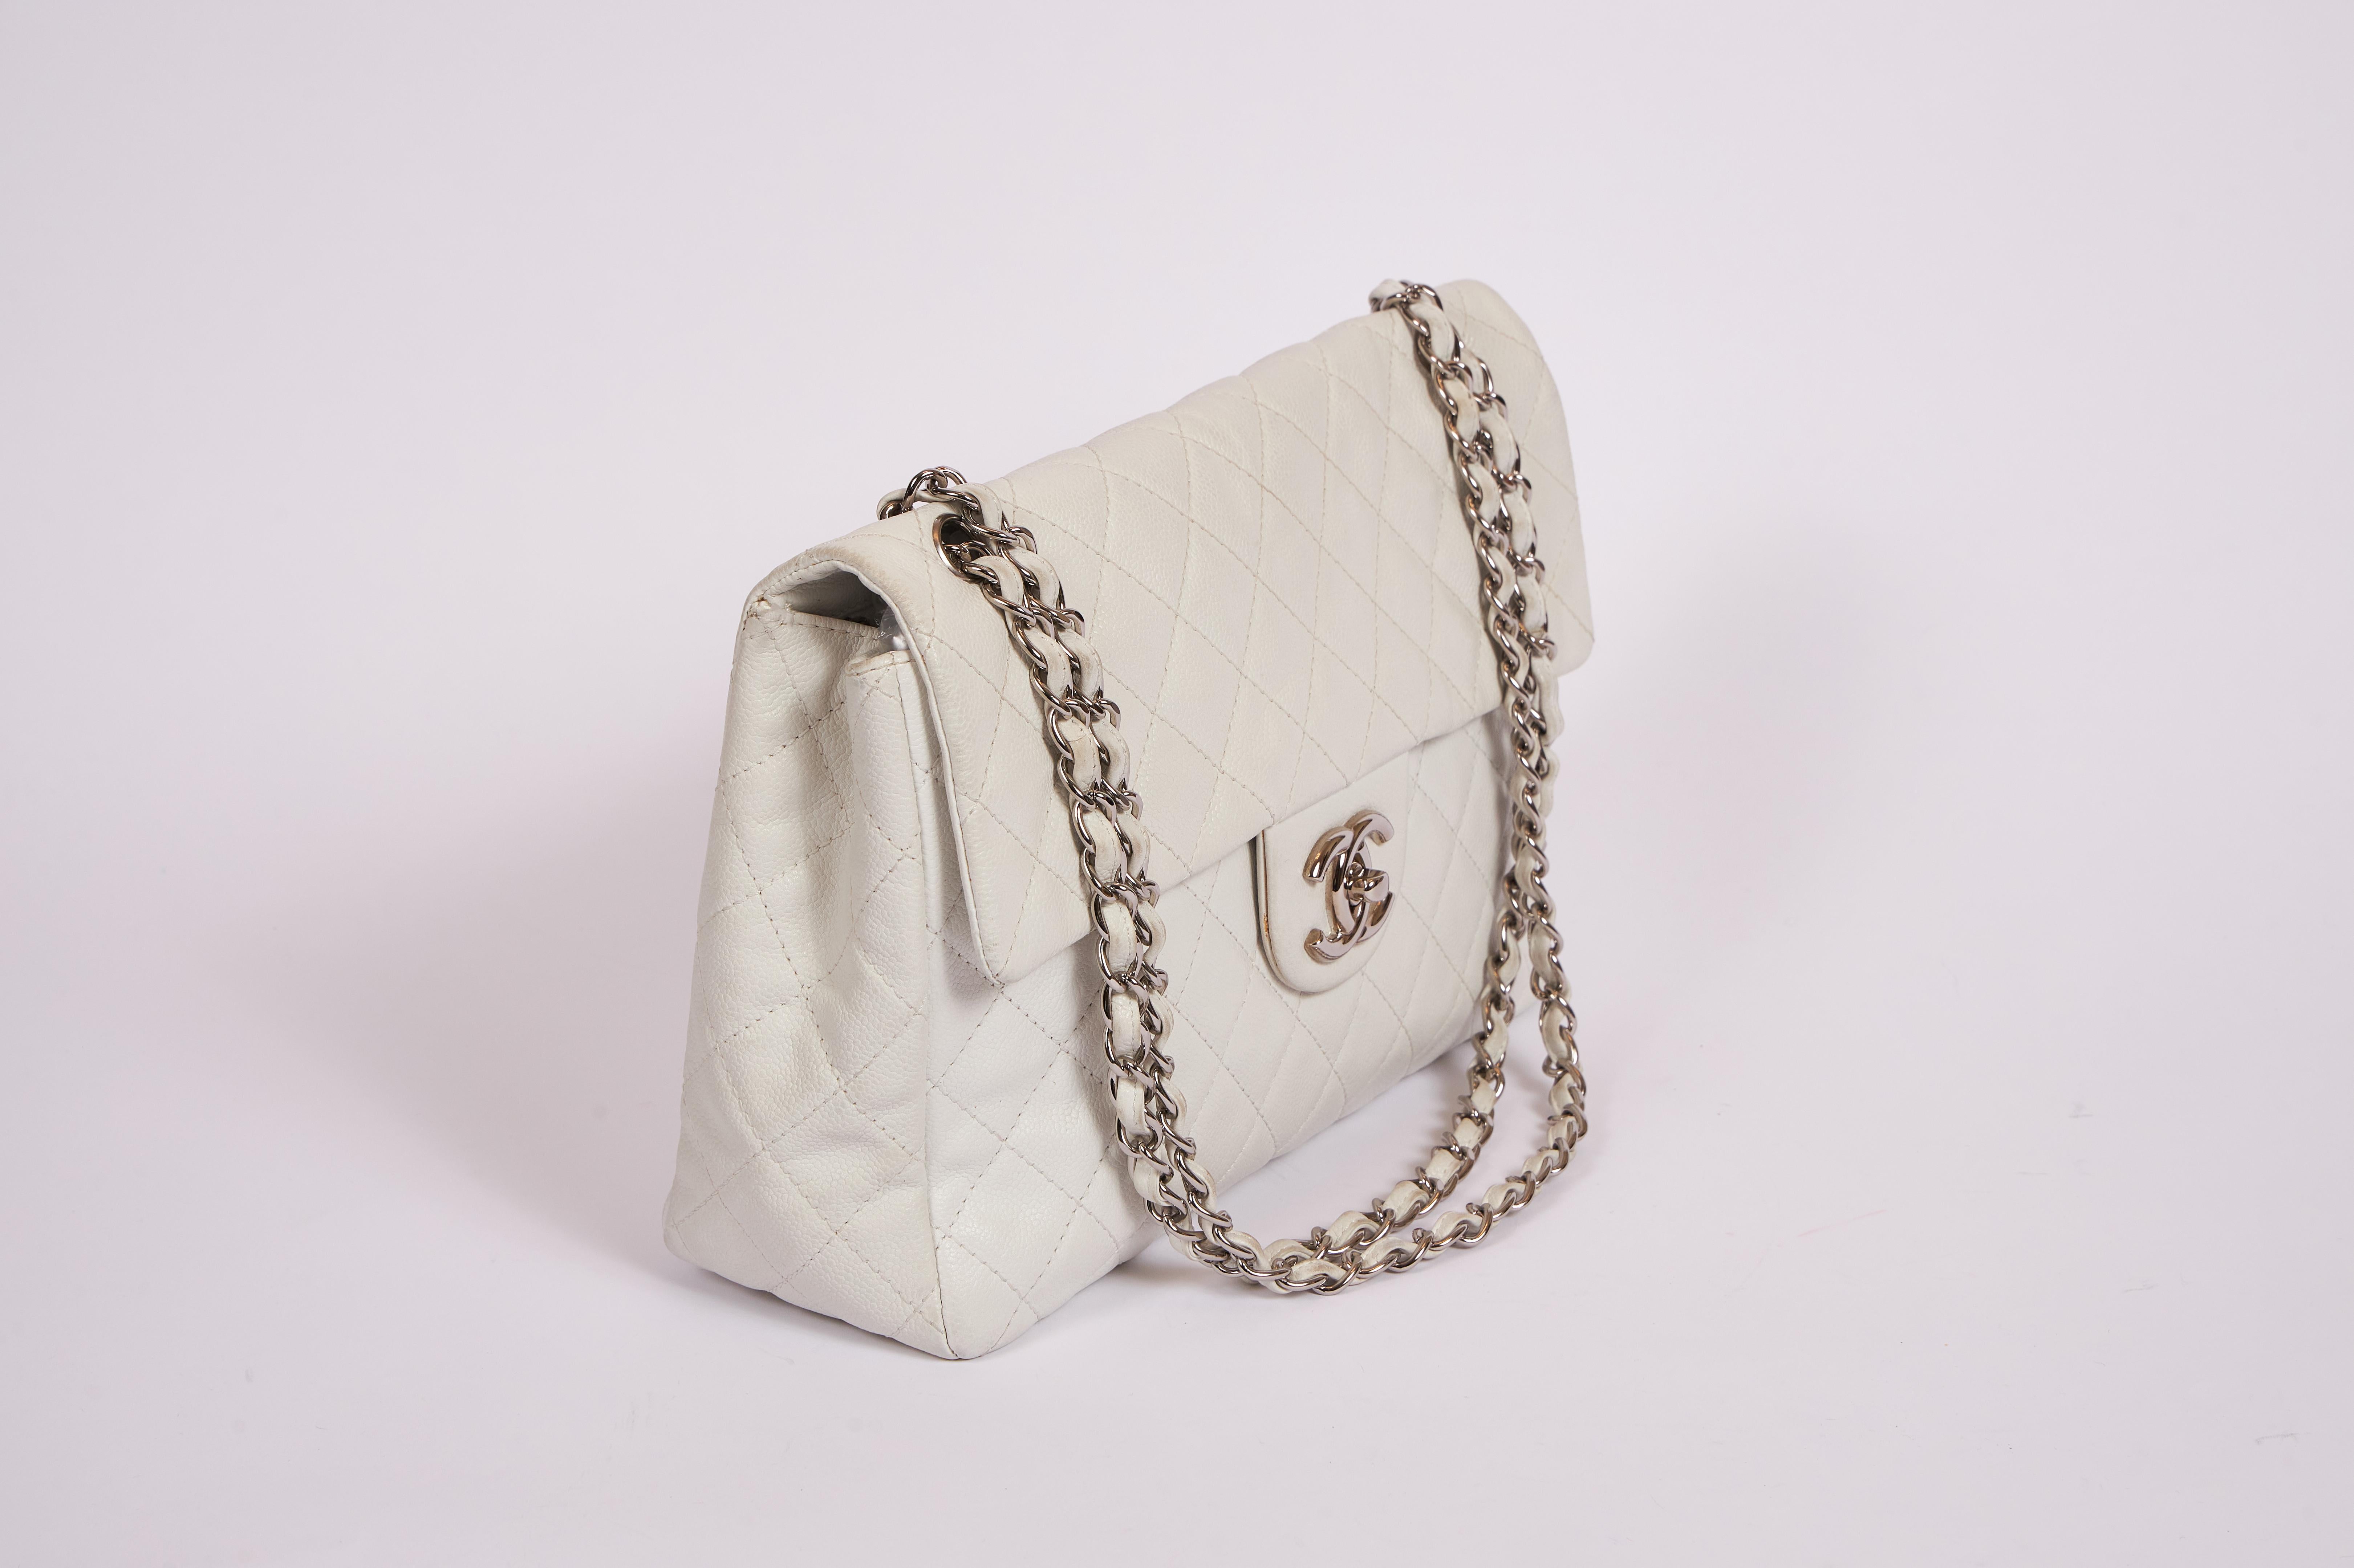 Chanel white caviar may single flap. Silver tone hardware. Very good condition. Little mark shown in one of the photos. Shoulder drop 12